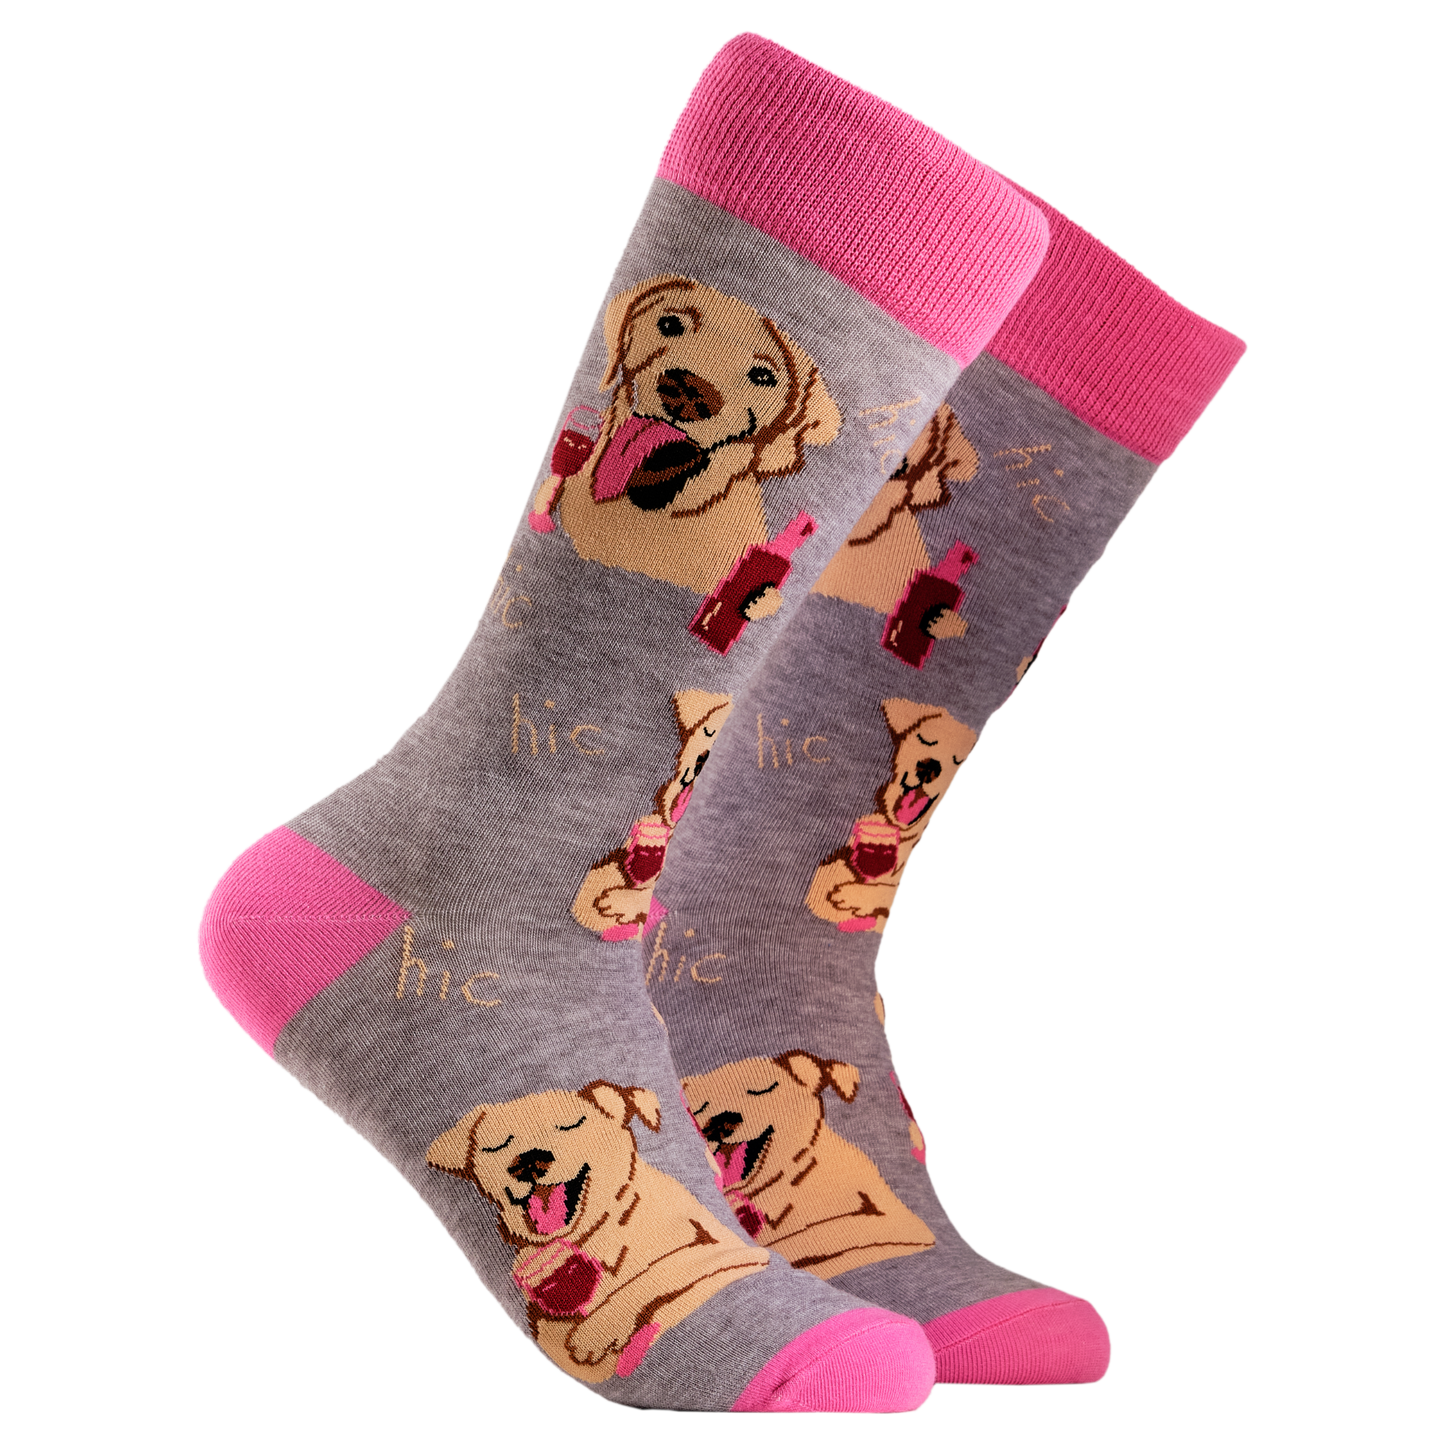 A pair of socks depicting labs drinking wine. Grey legs, light pink cuff, heel and toe.